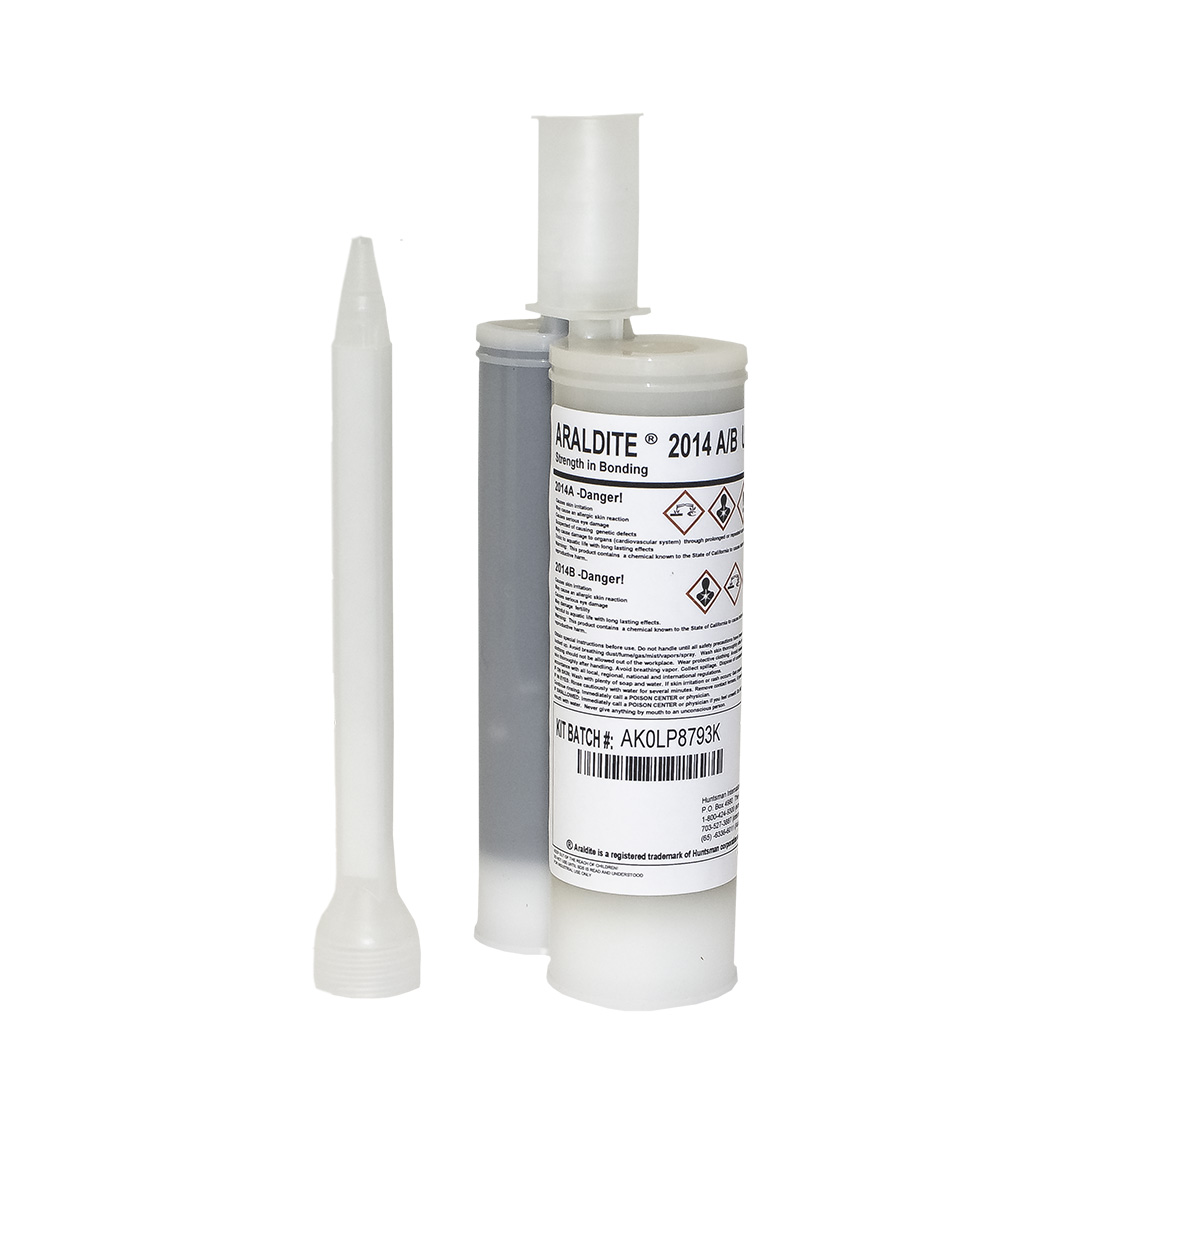 Chem-Set™ 633 5 Minute Gel Epoxy Adhesive - Chemical Concepts